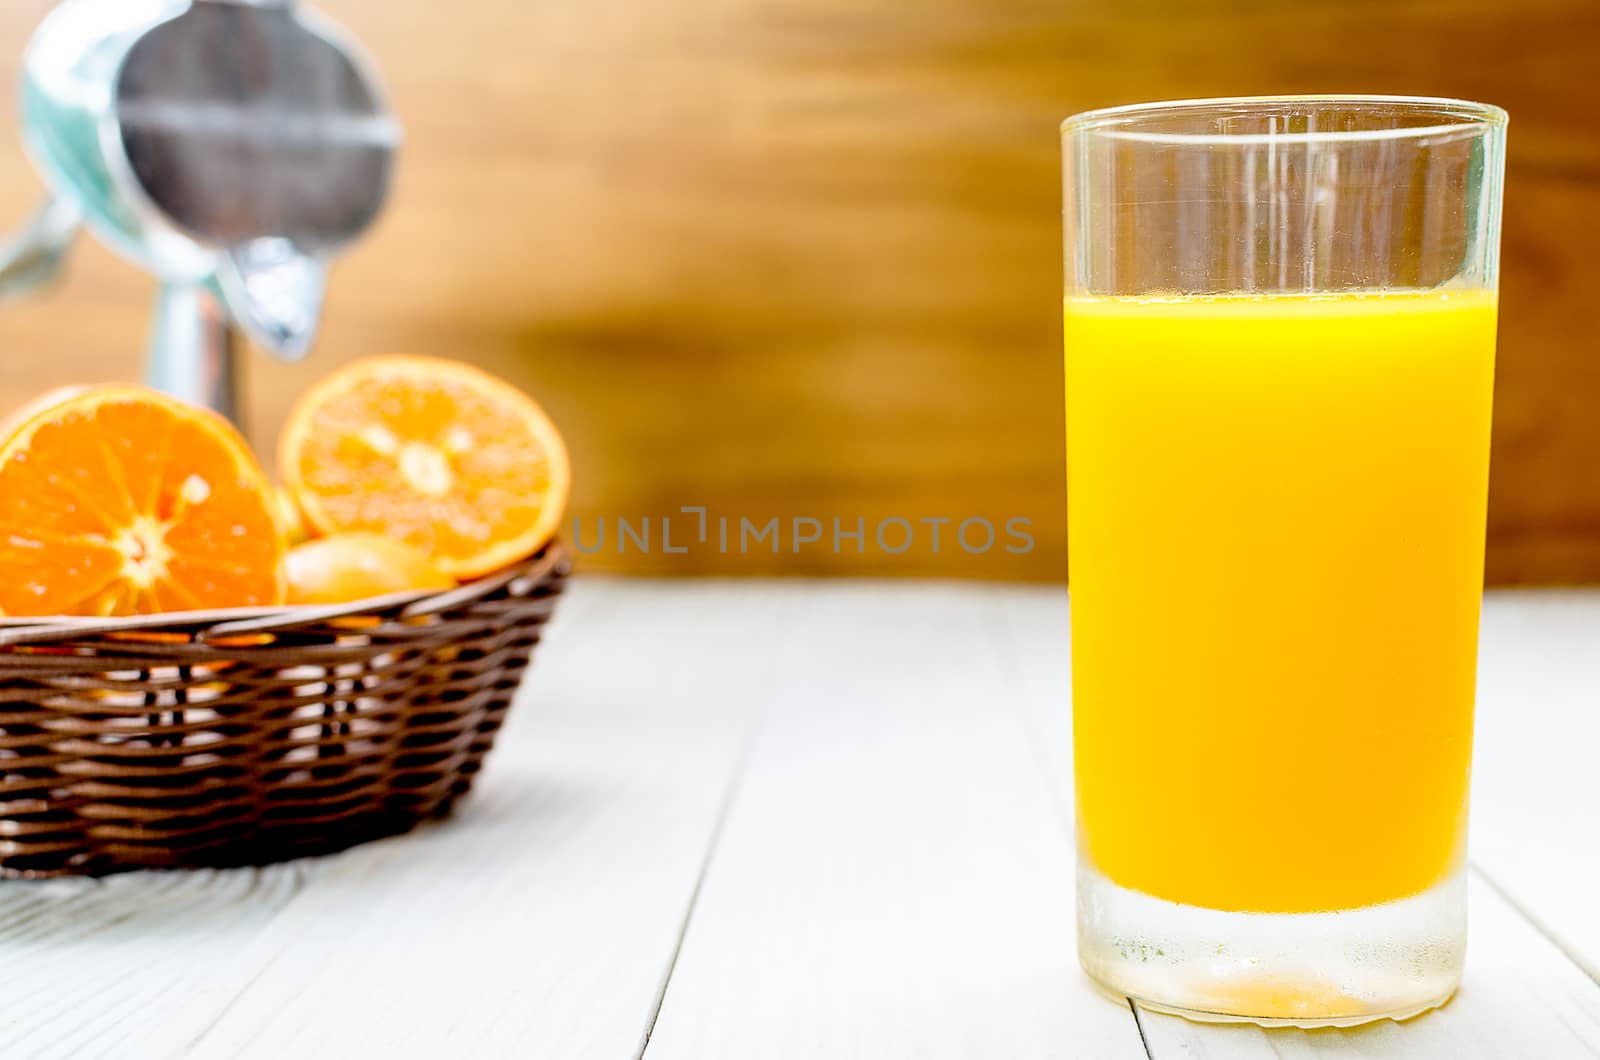 The Freshly Squeezed Orange juice on the white wood table and in front of sliced oranges in the wicker brown basket.